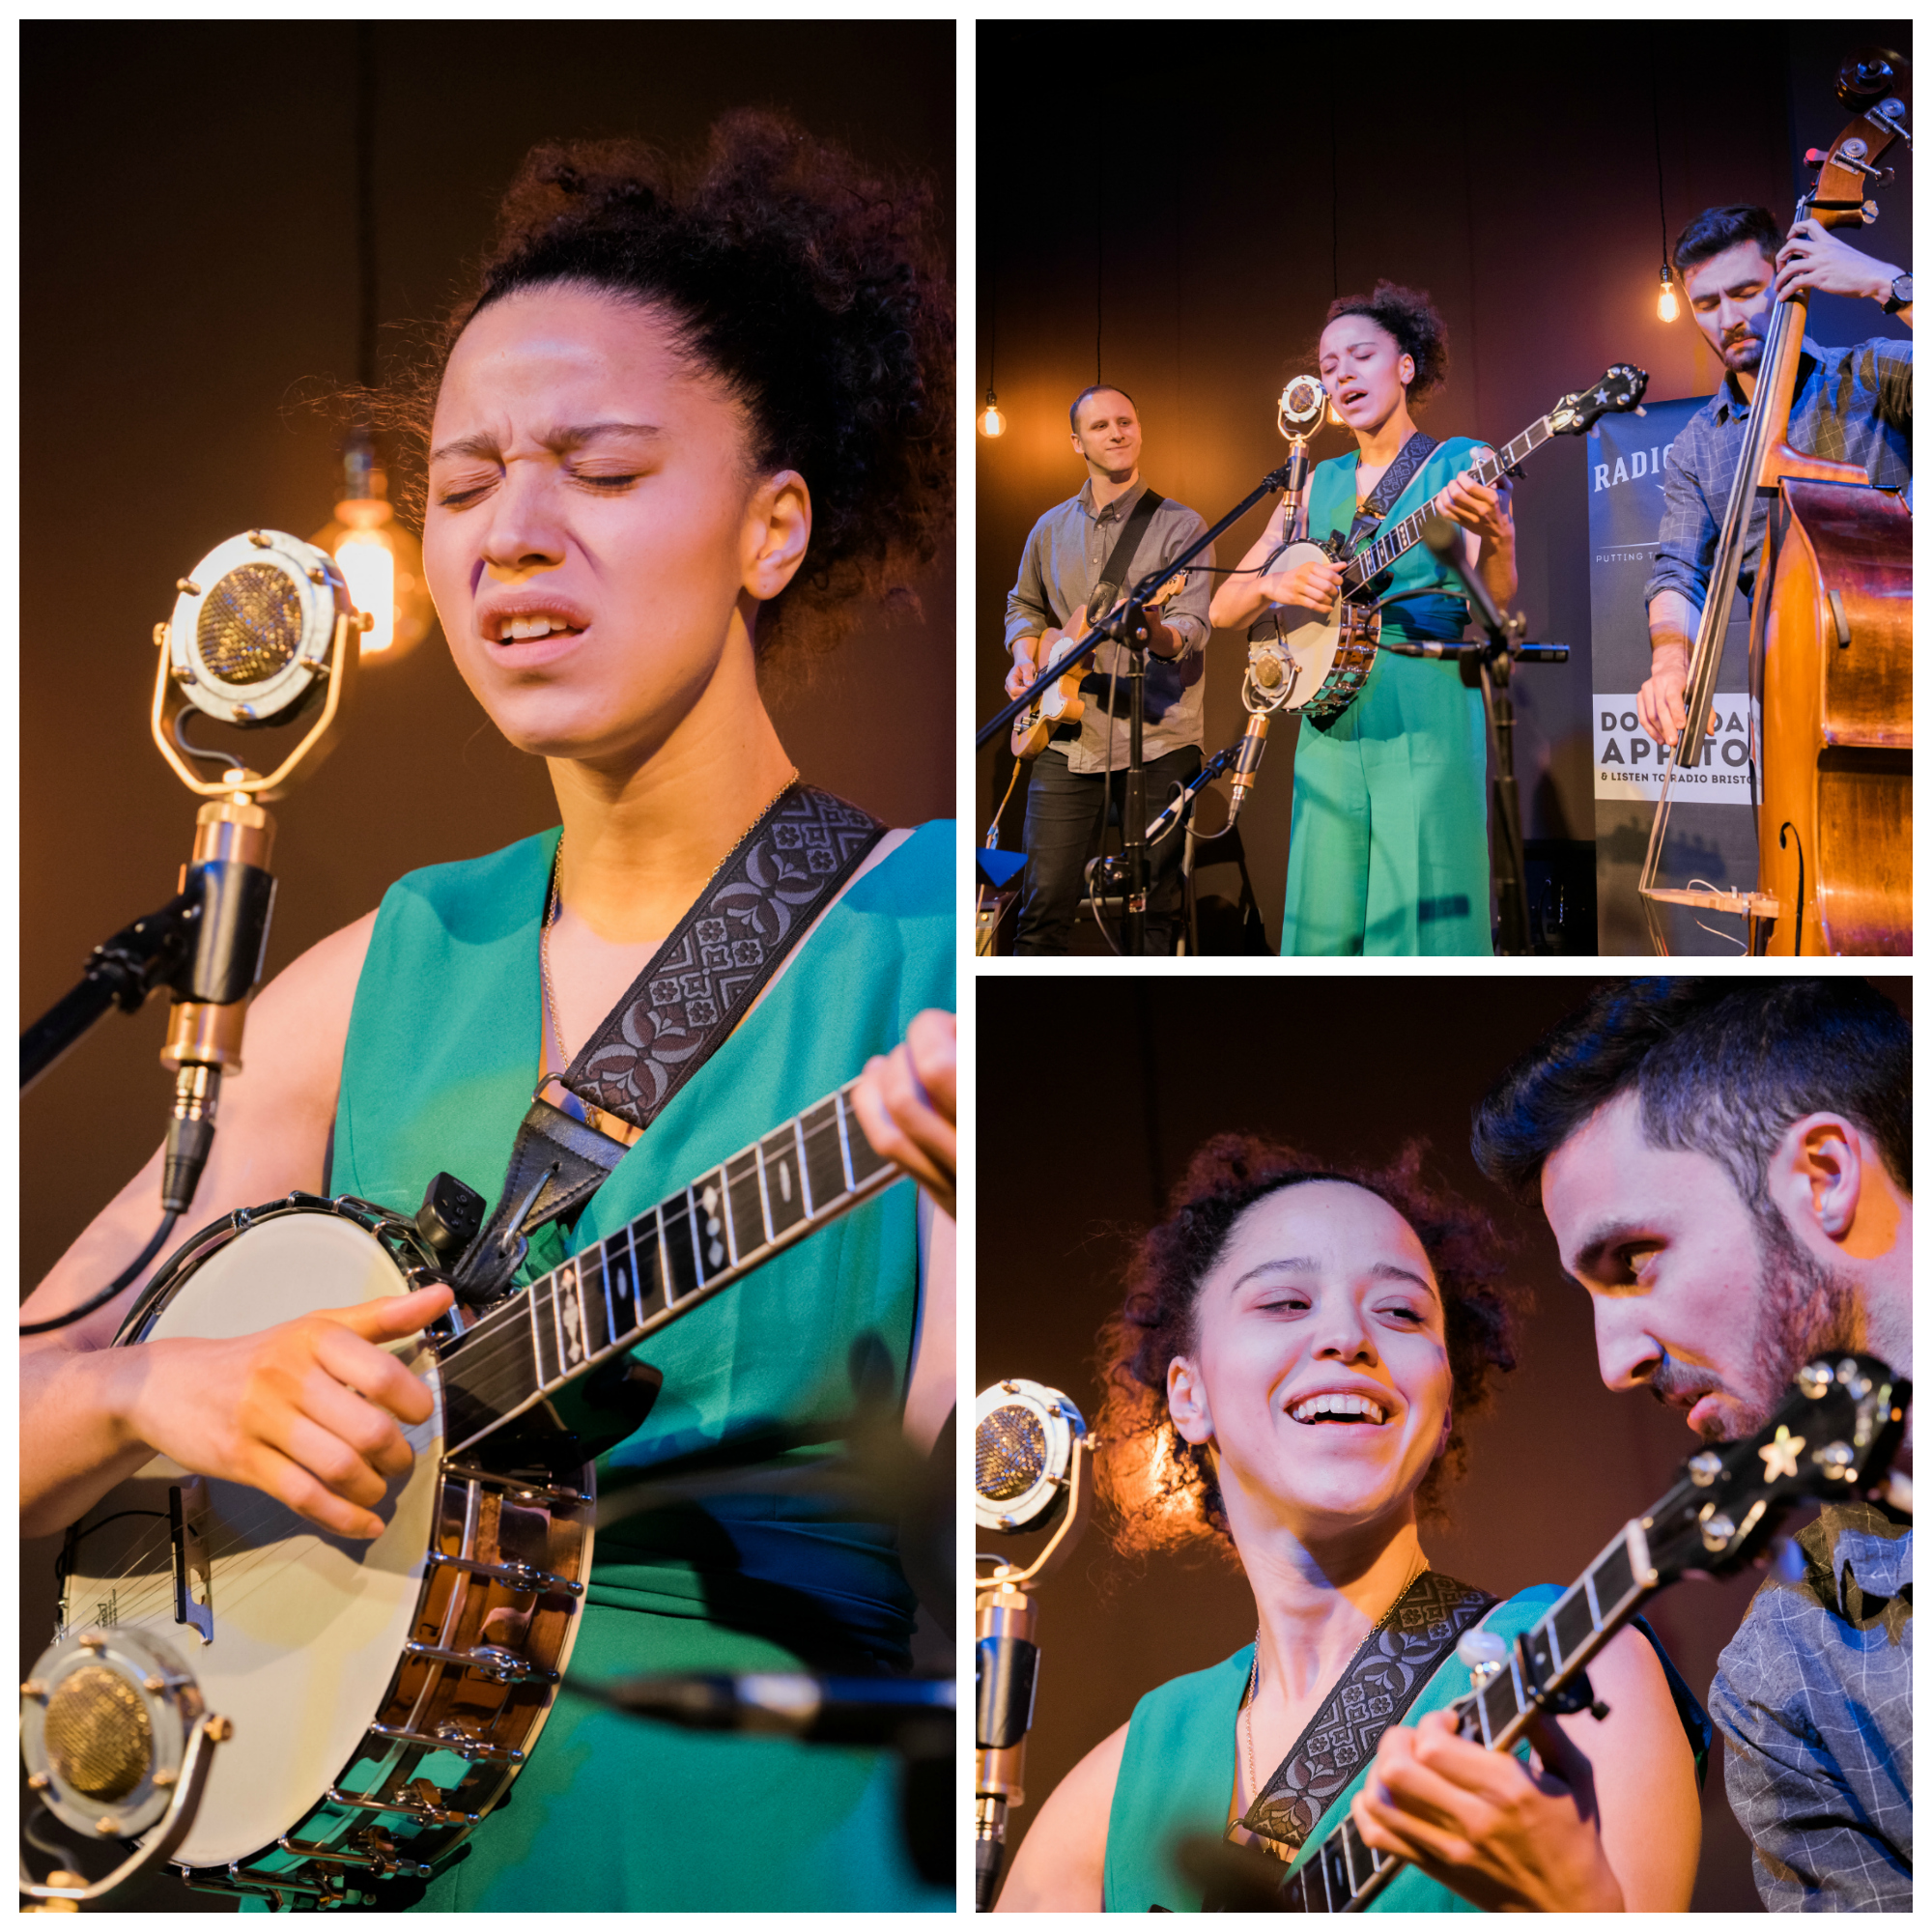 Left pic: Close up on Kai, eyes closed and singing at the mic with her banjo; top right pic: Kai flanked by her two band members; bottom right pic: Kai and the bass player lean together as they sing.